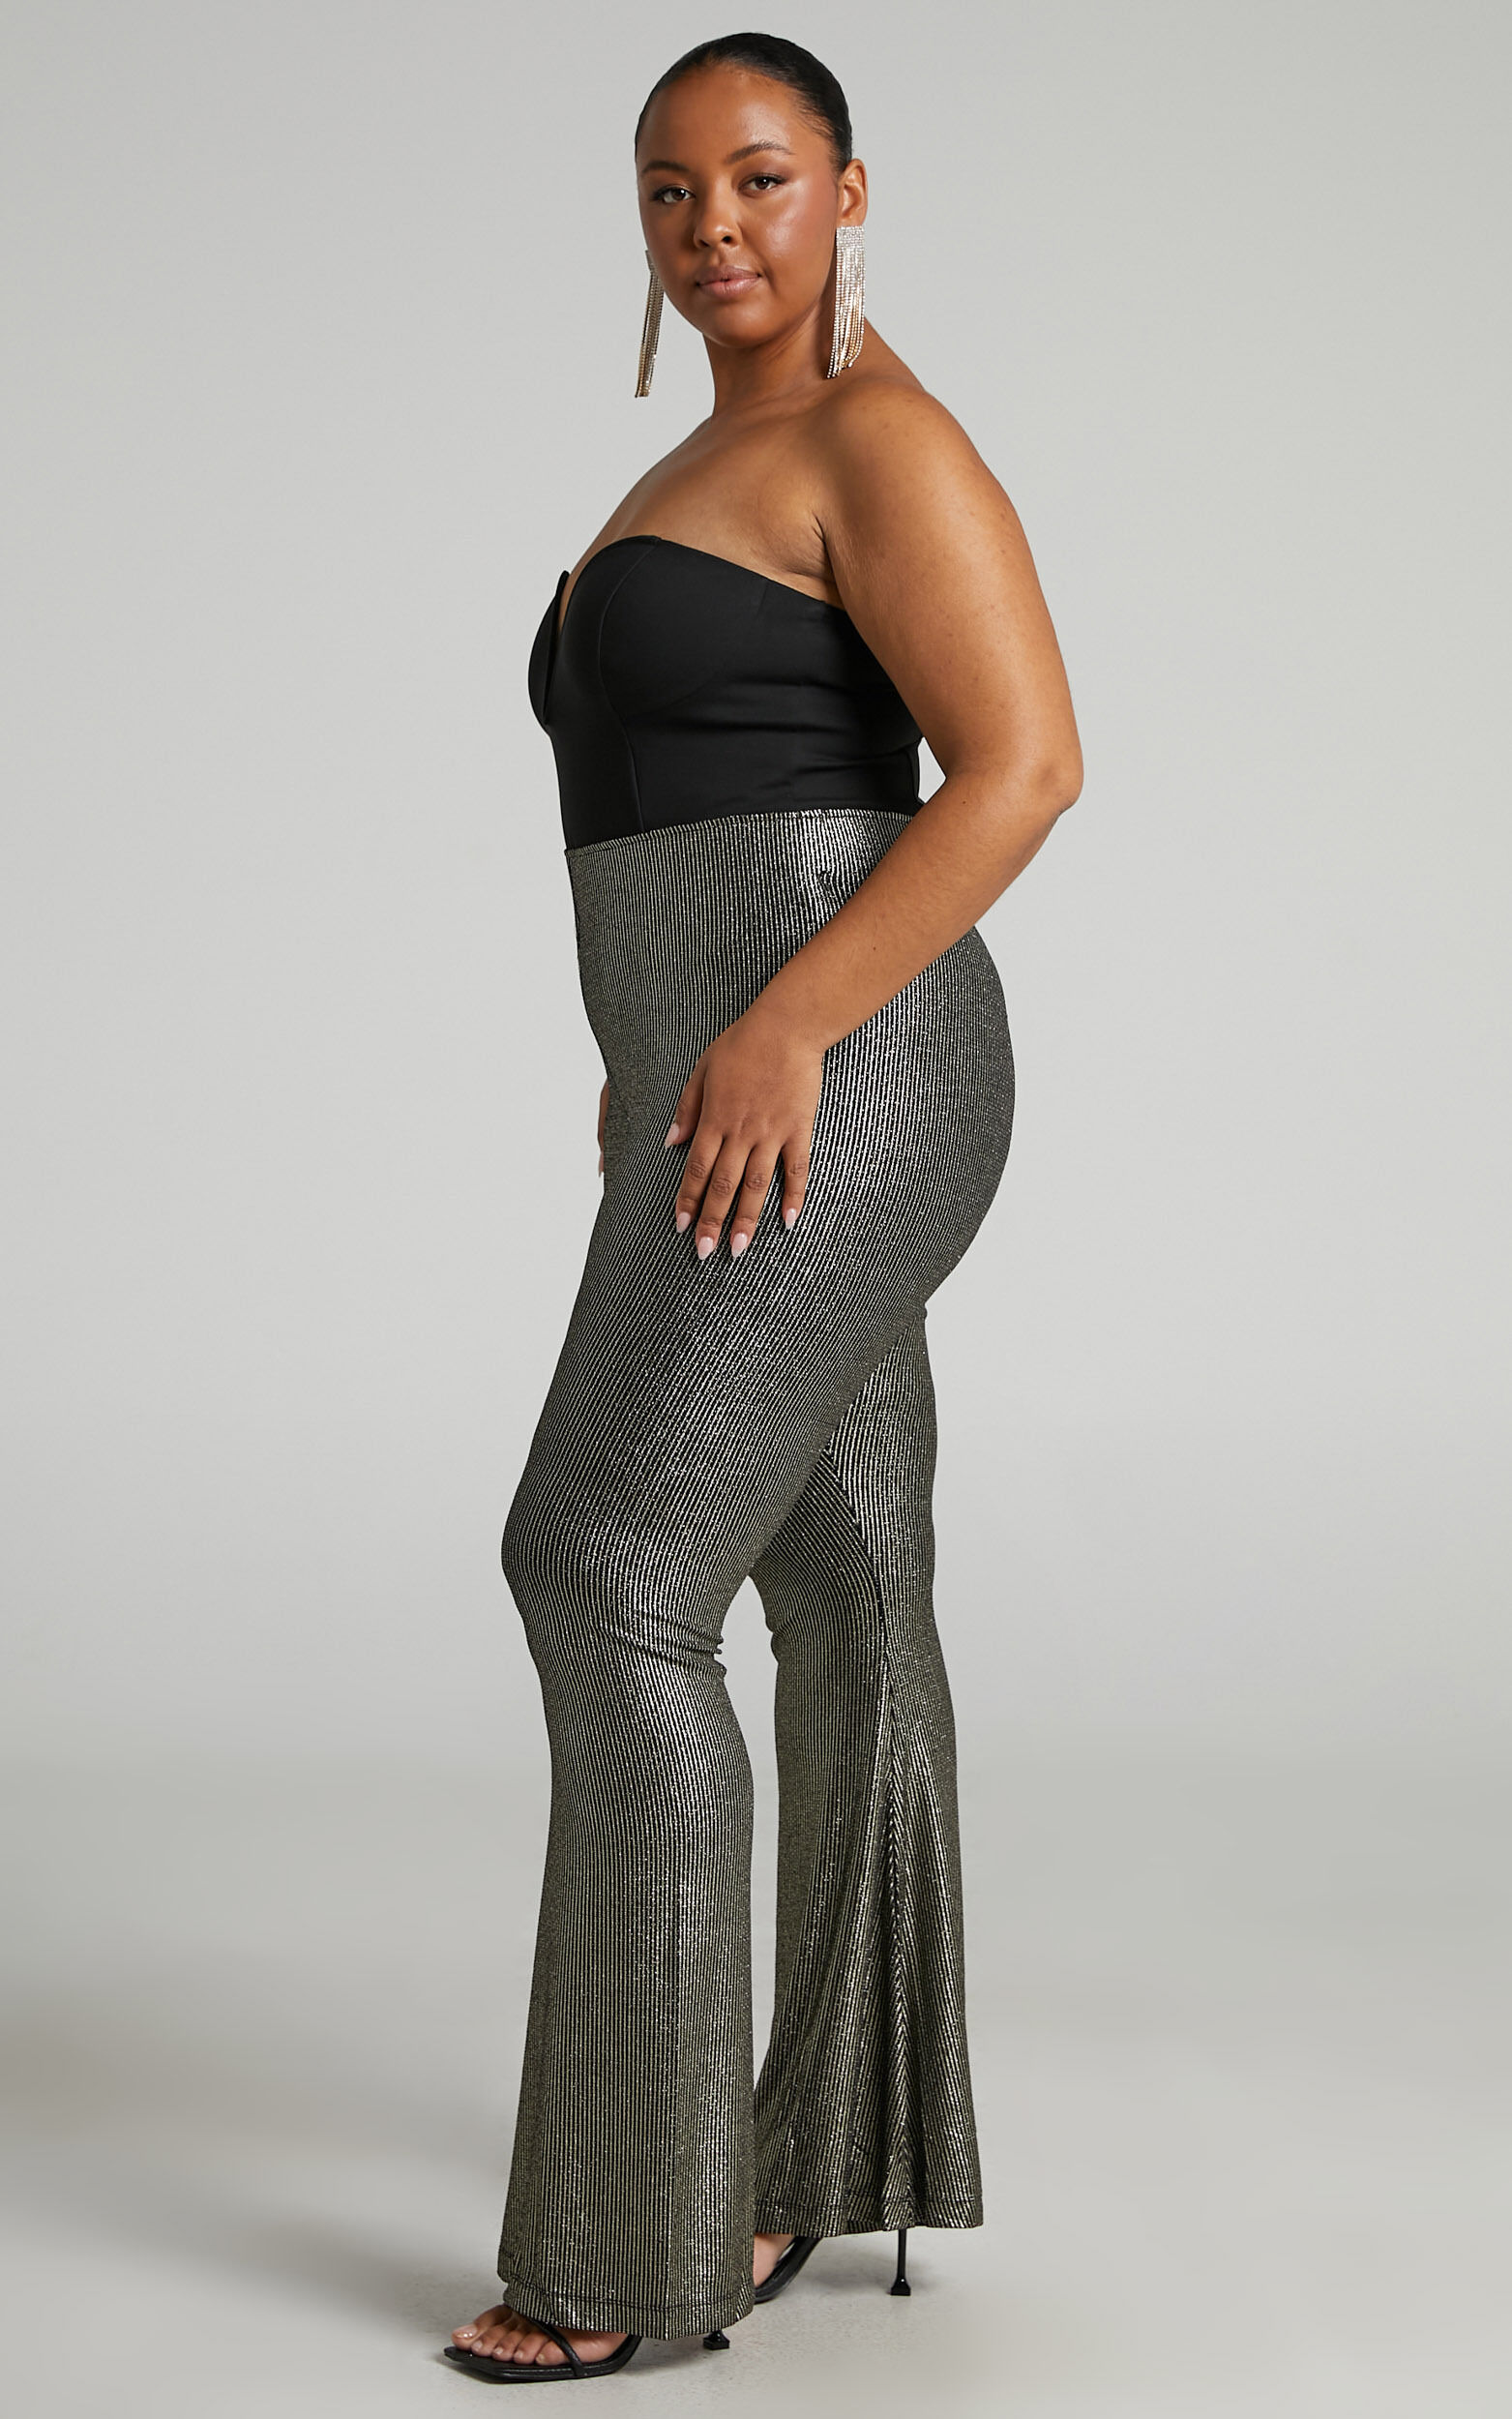 Plus Size Sequin Tailored Flared Pants